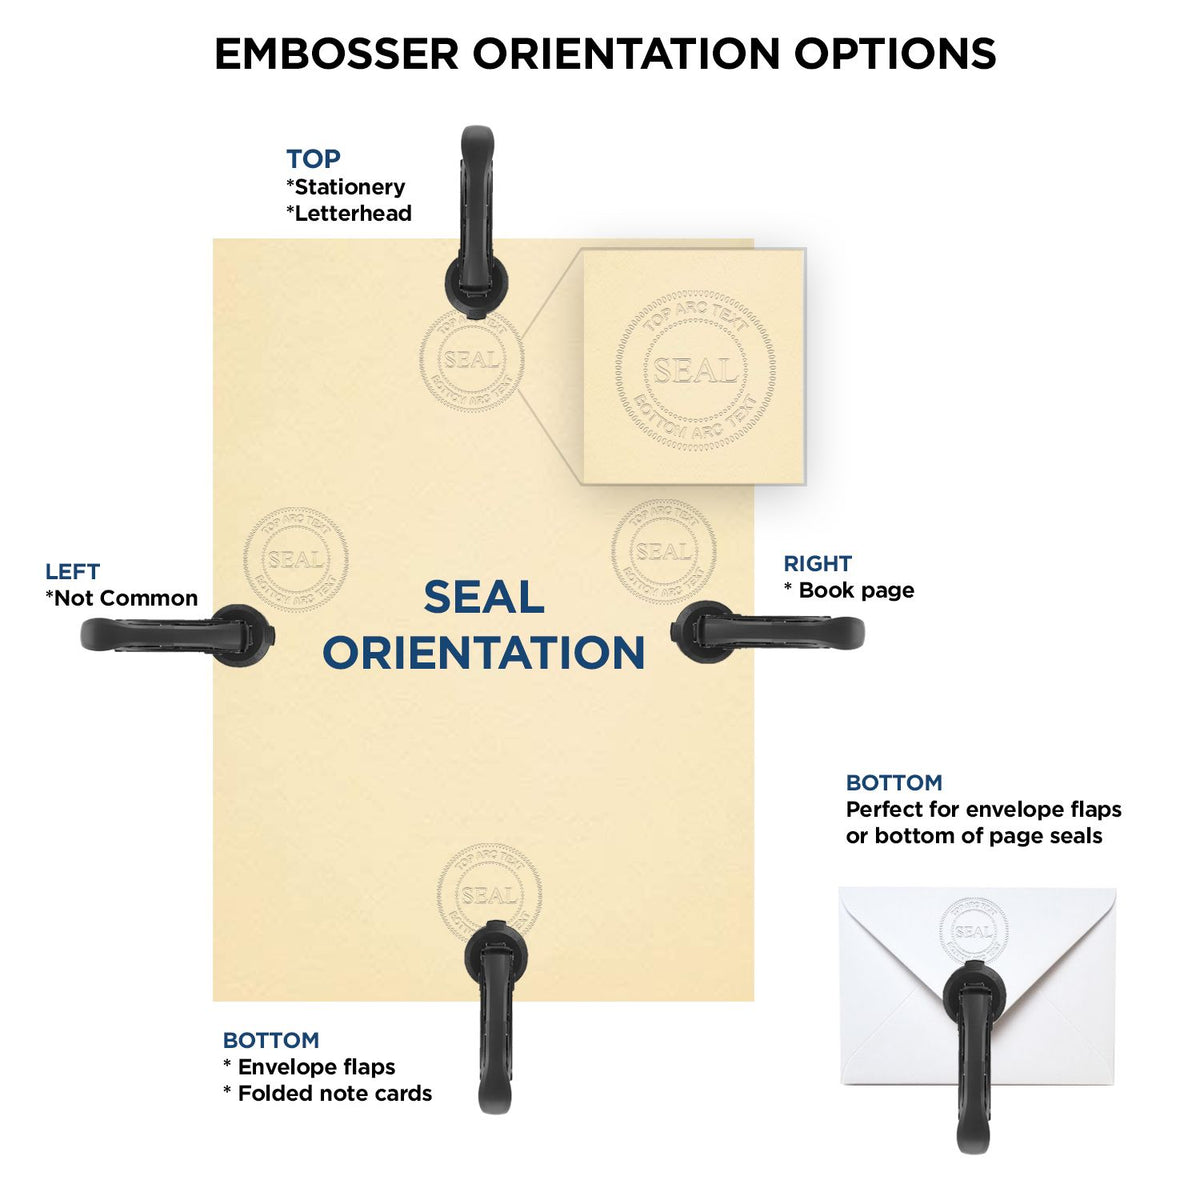 An infographic for the Gift New Mexico Engineer Seal showing embosser orientation, this is showing examples of a top, bottom, right and left insert.